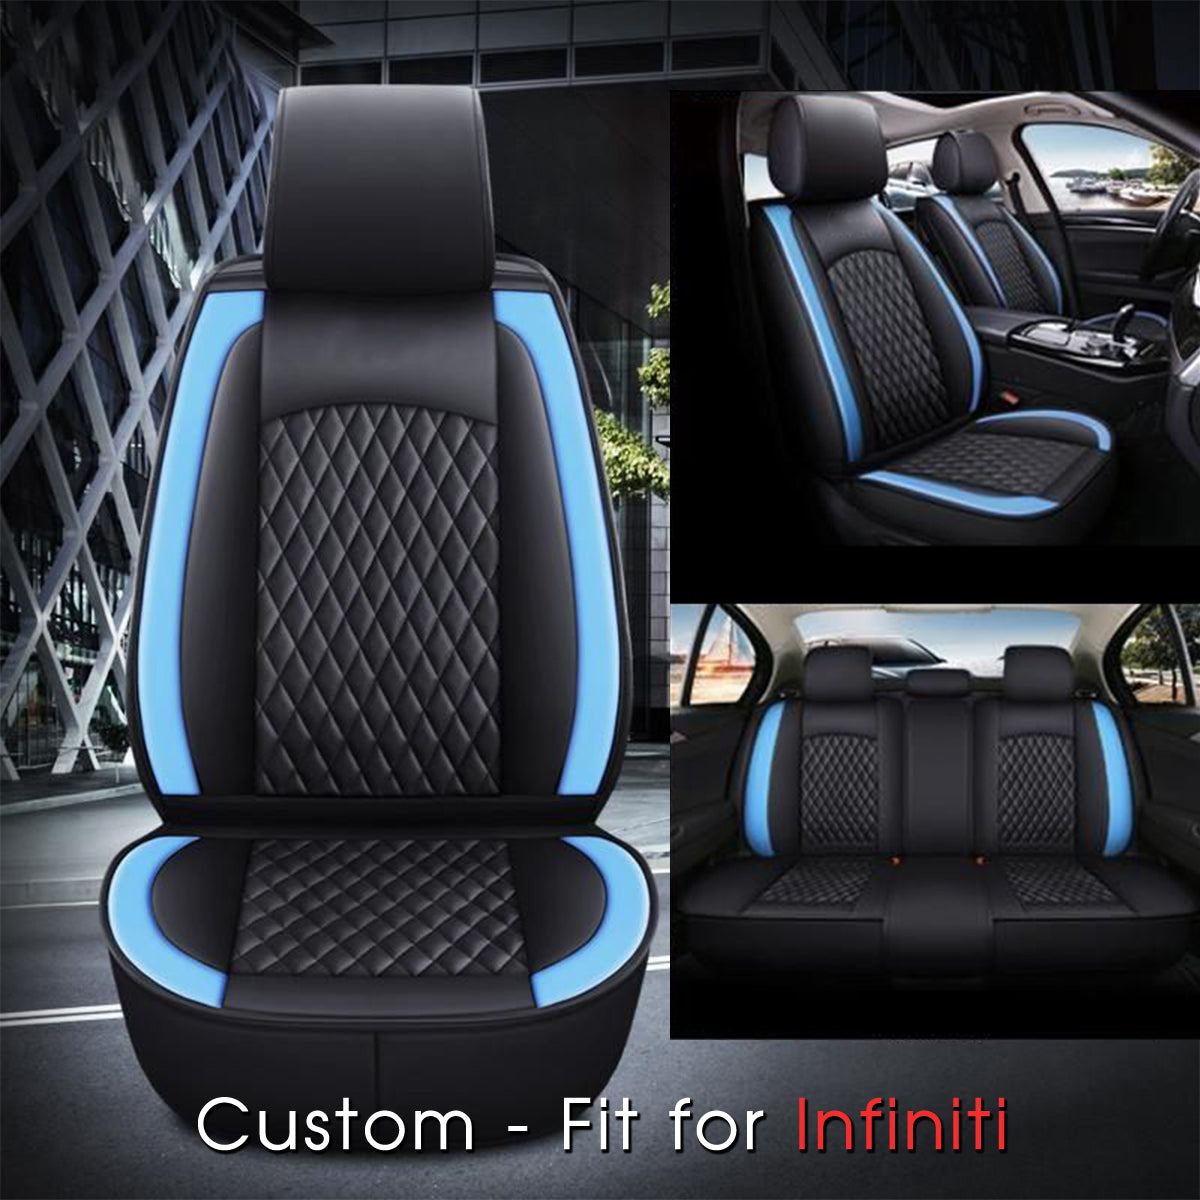 2 Car Seat Covers Full Set, Custom-Fit For Car, Waterproof Leather Front Rear Seat Automotive Protection Cushions, Car Accessories DLIN211